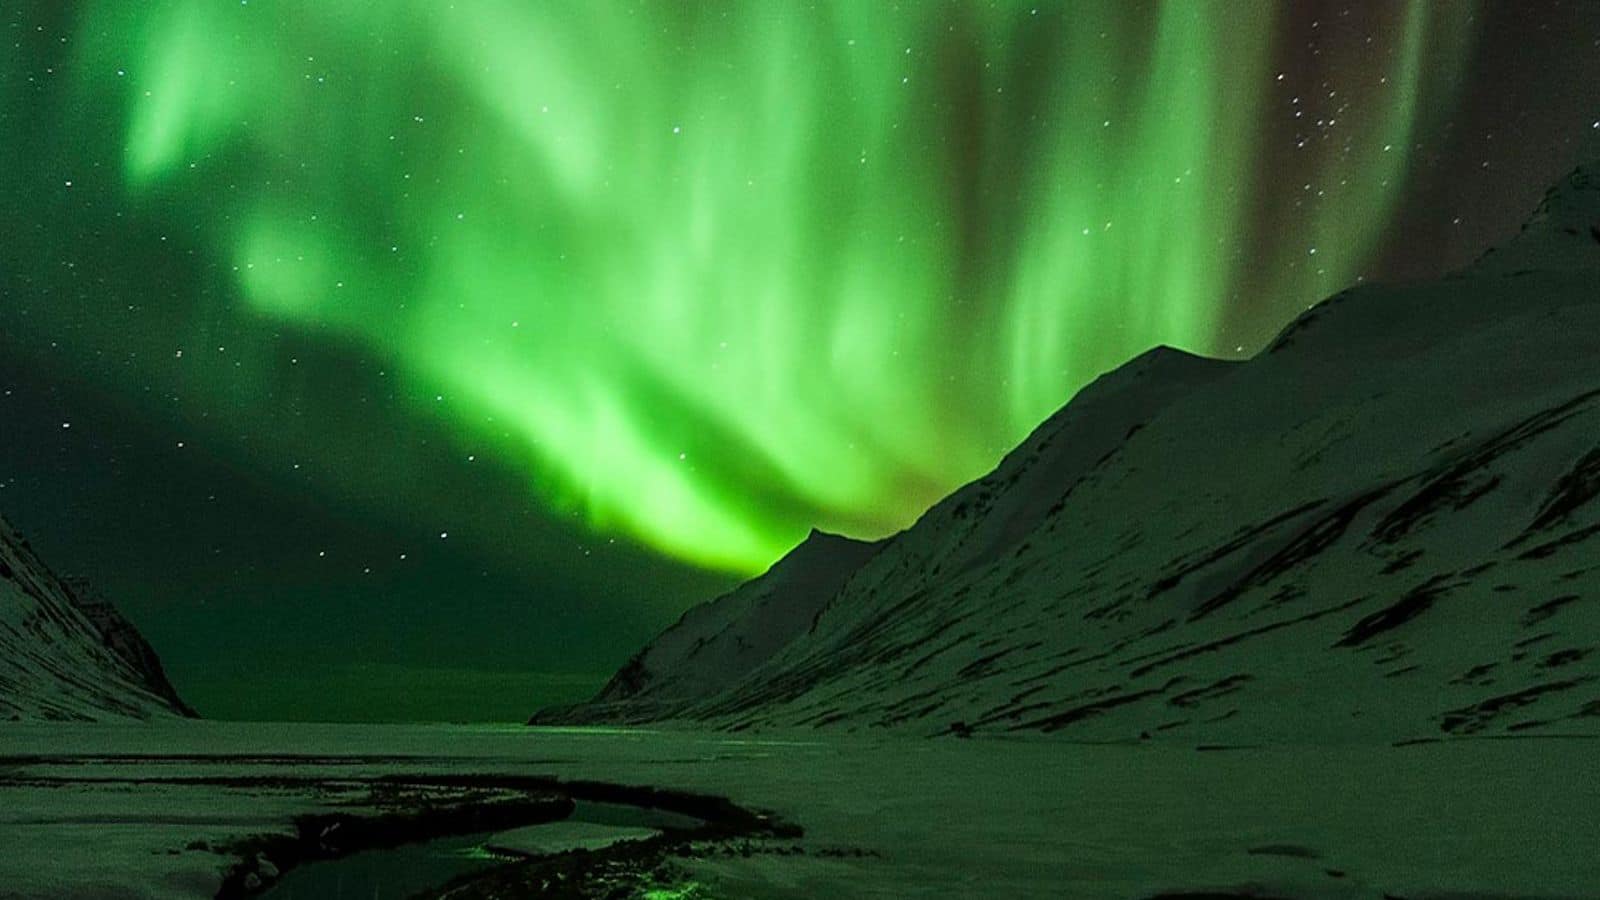 Chase the northern lights in Reykjavik, Iceland with this guide